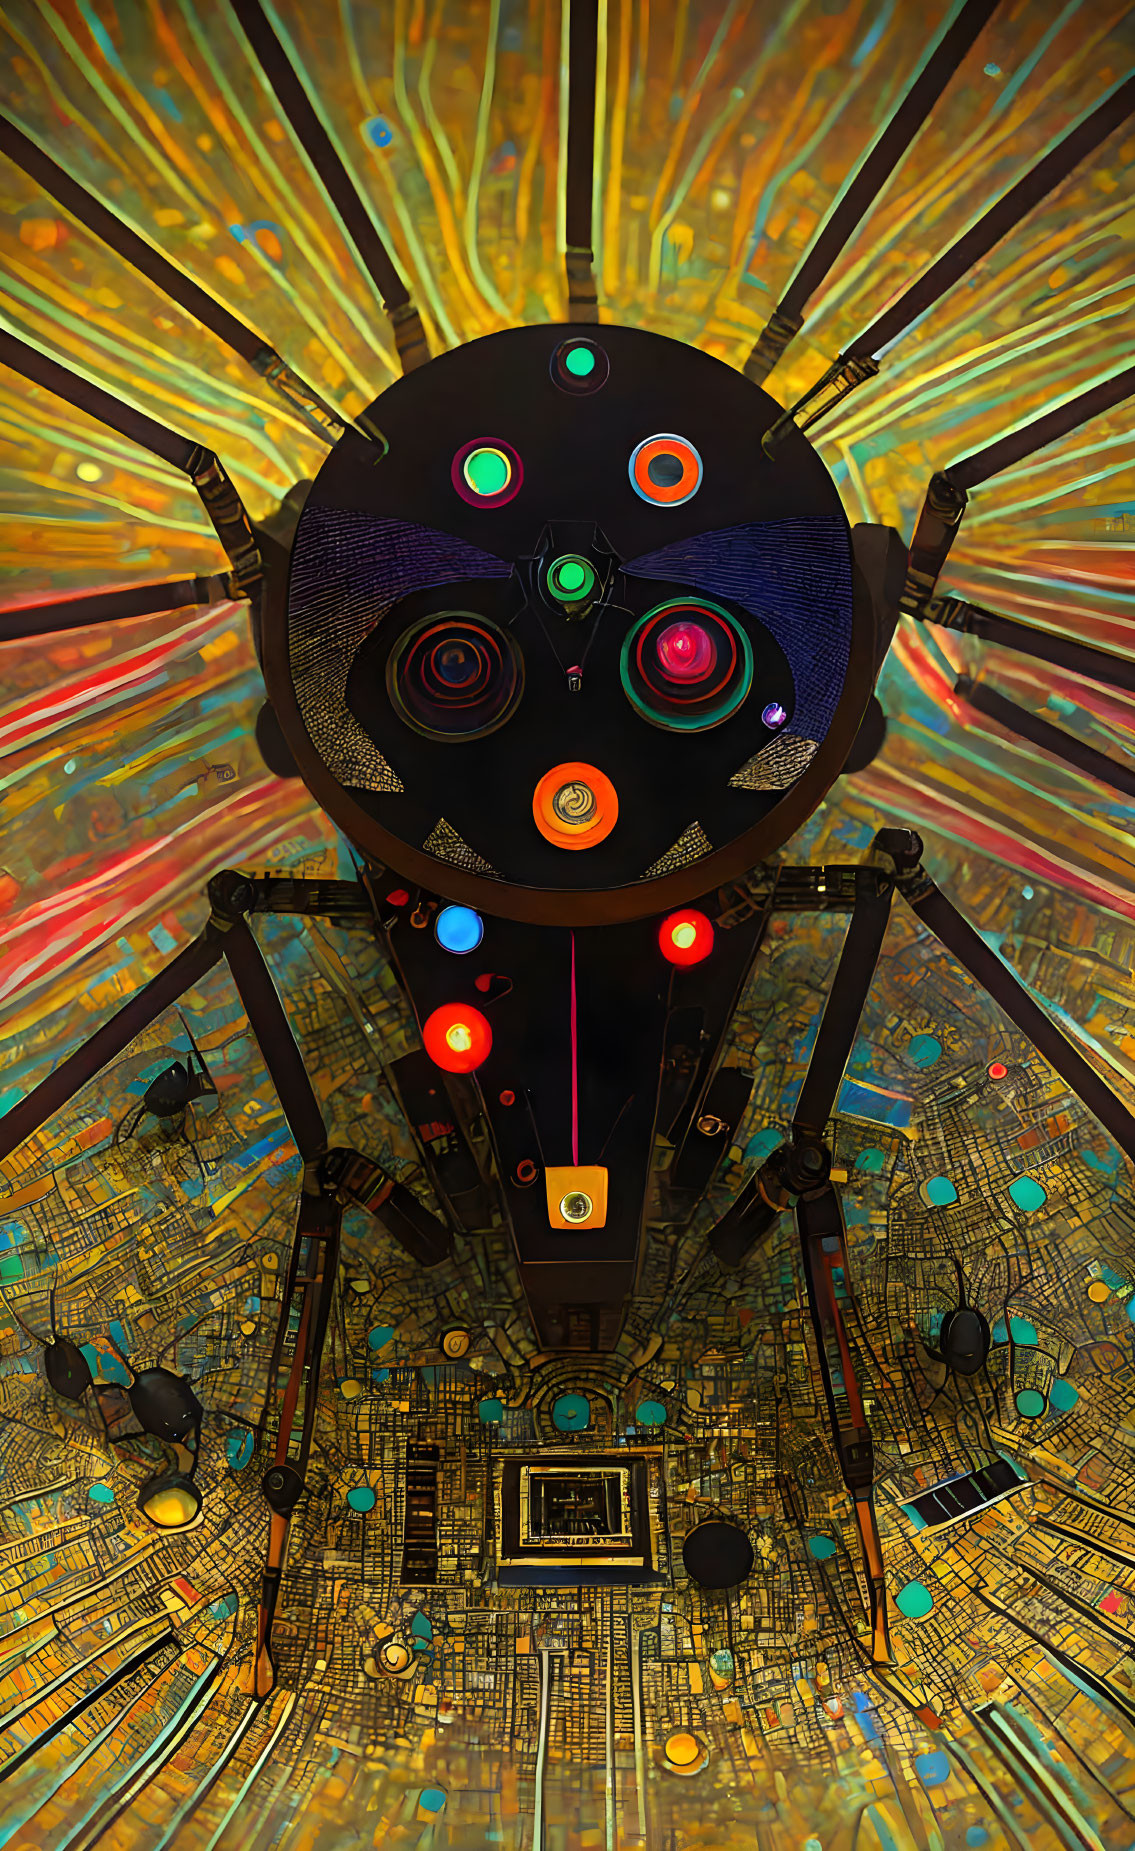 Colorful Abstract Design Pinball Machine with Illuminated Targets and Metallic Accents